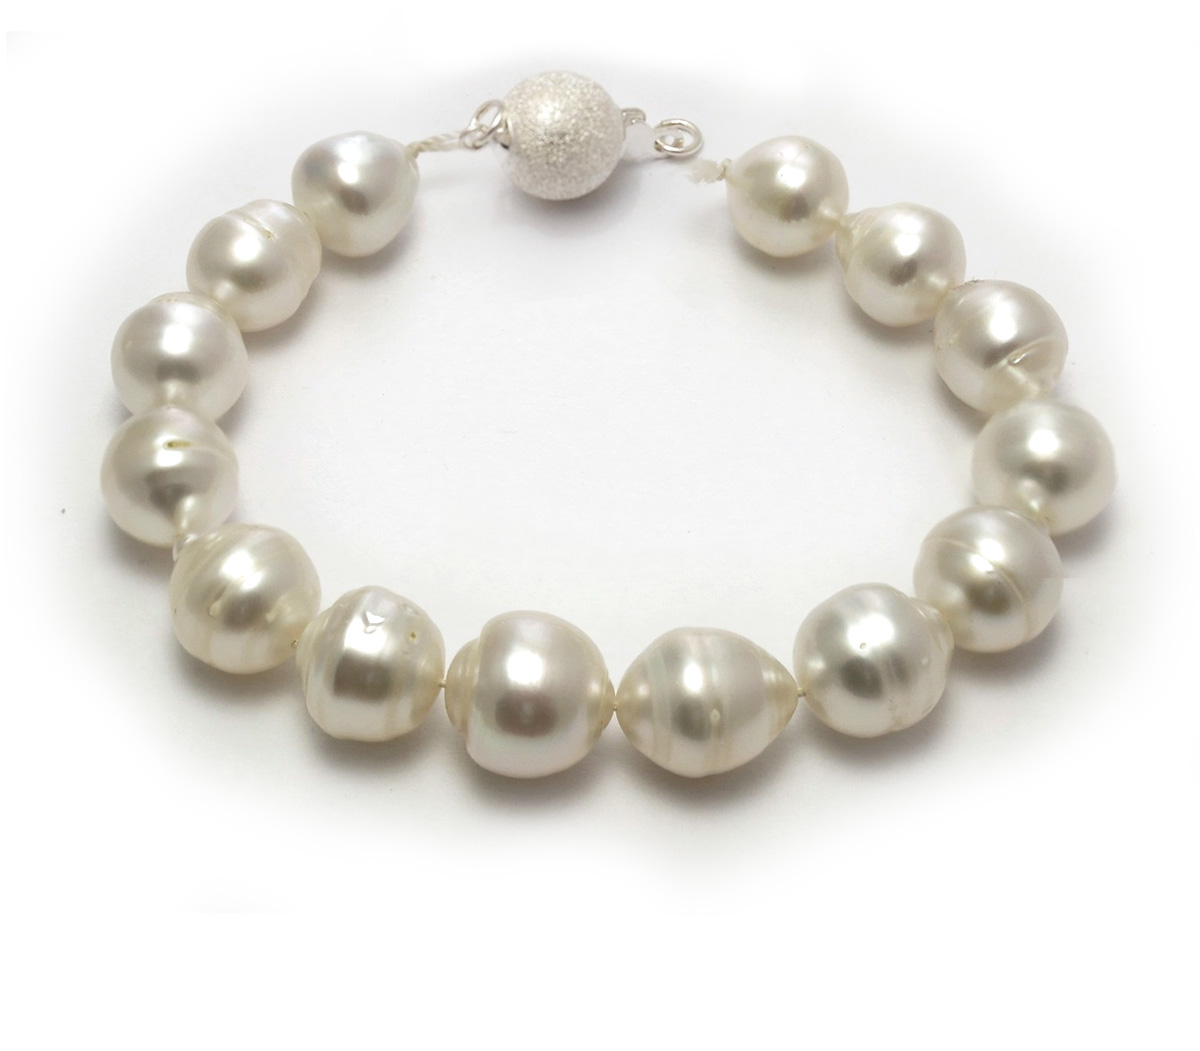 South Sea Pearl Bracelet with Semi-Baroque White South Sea Pearls